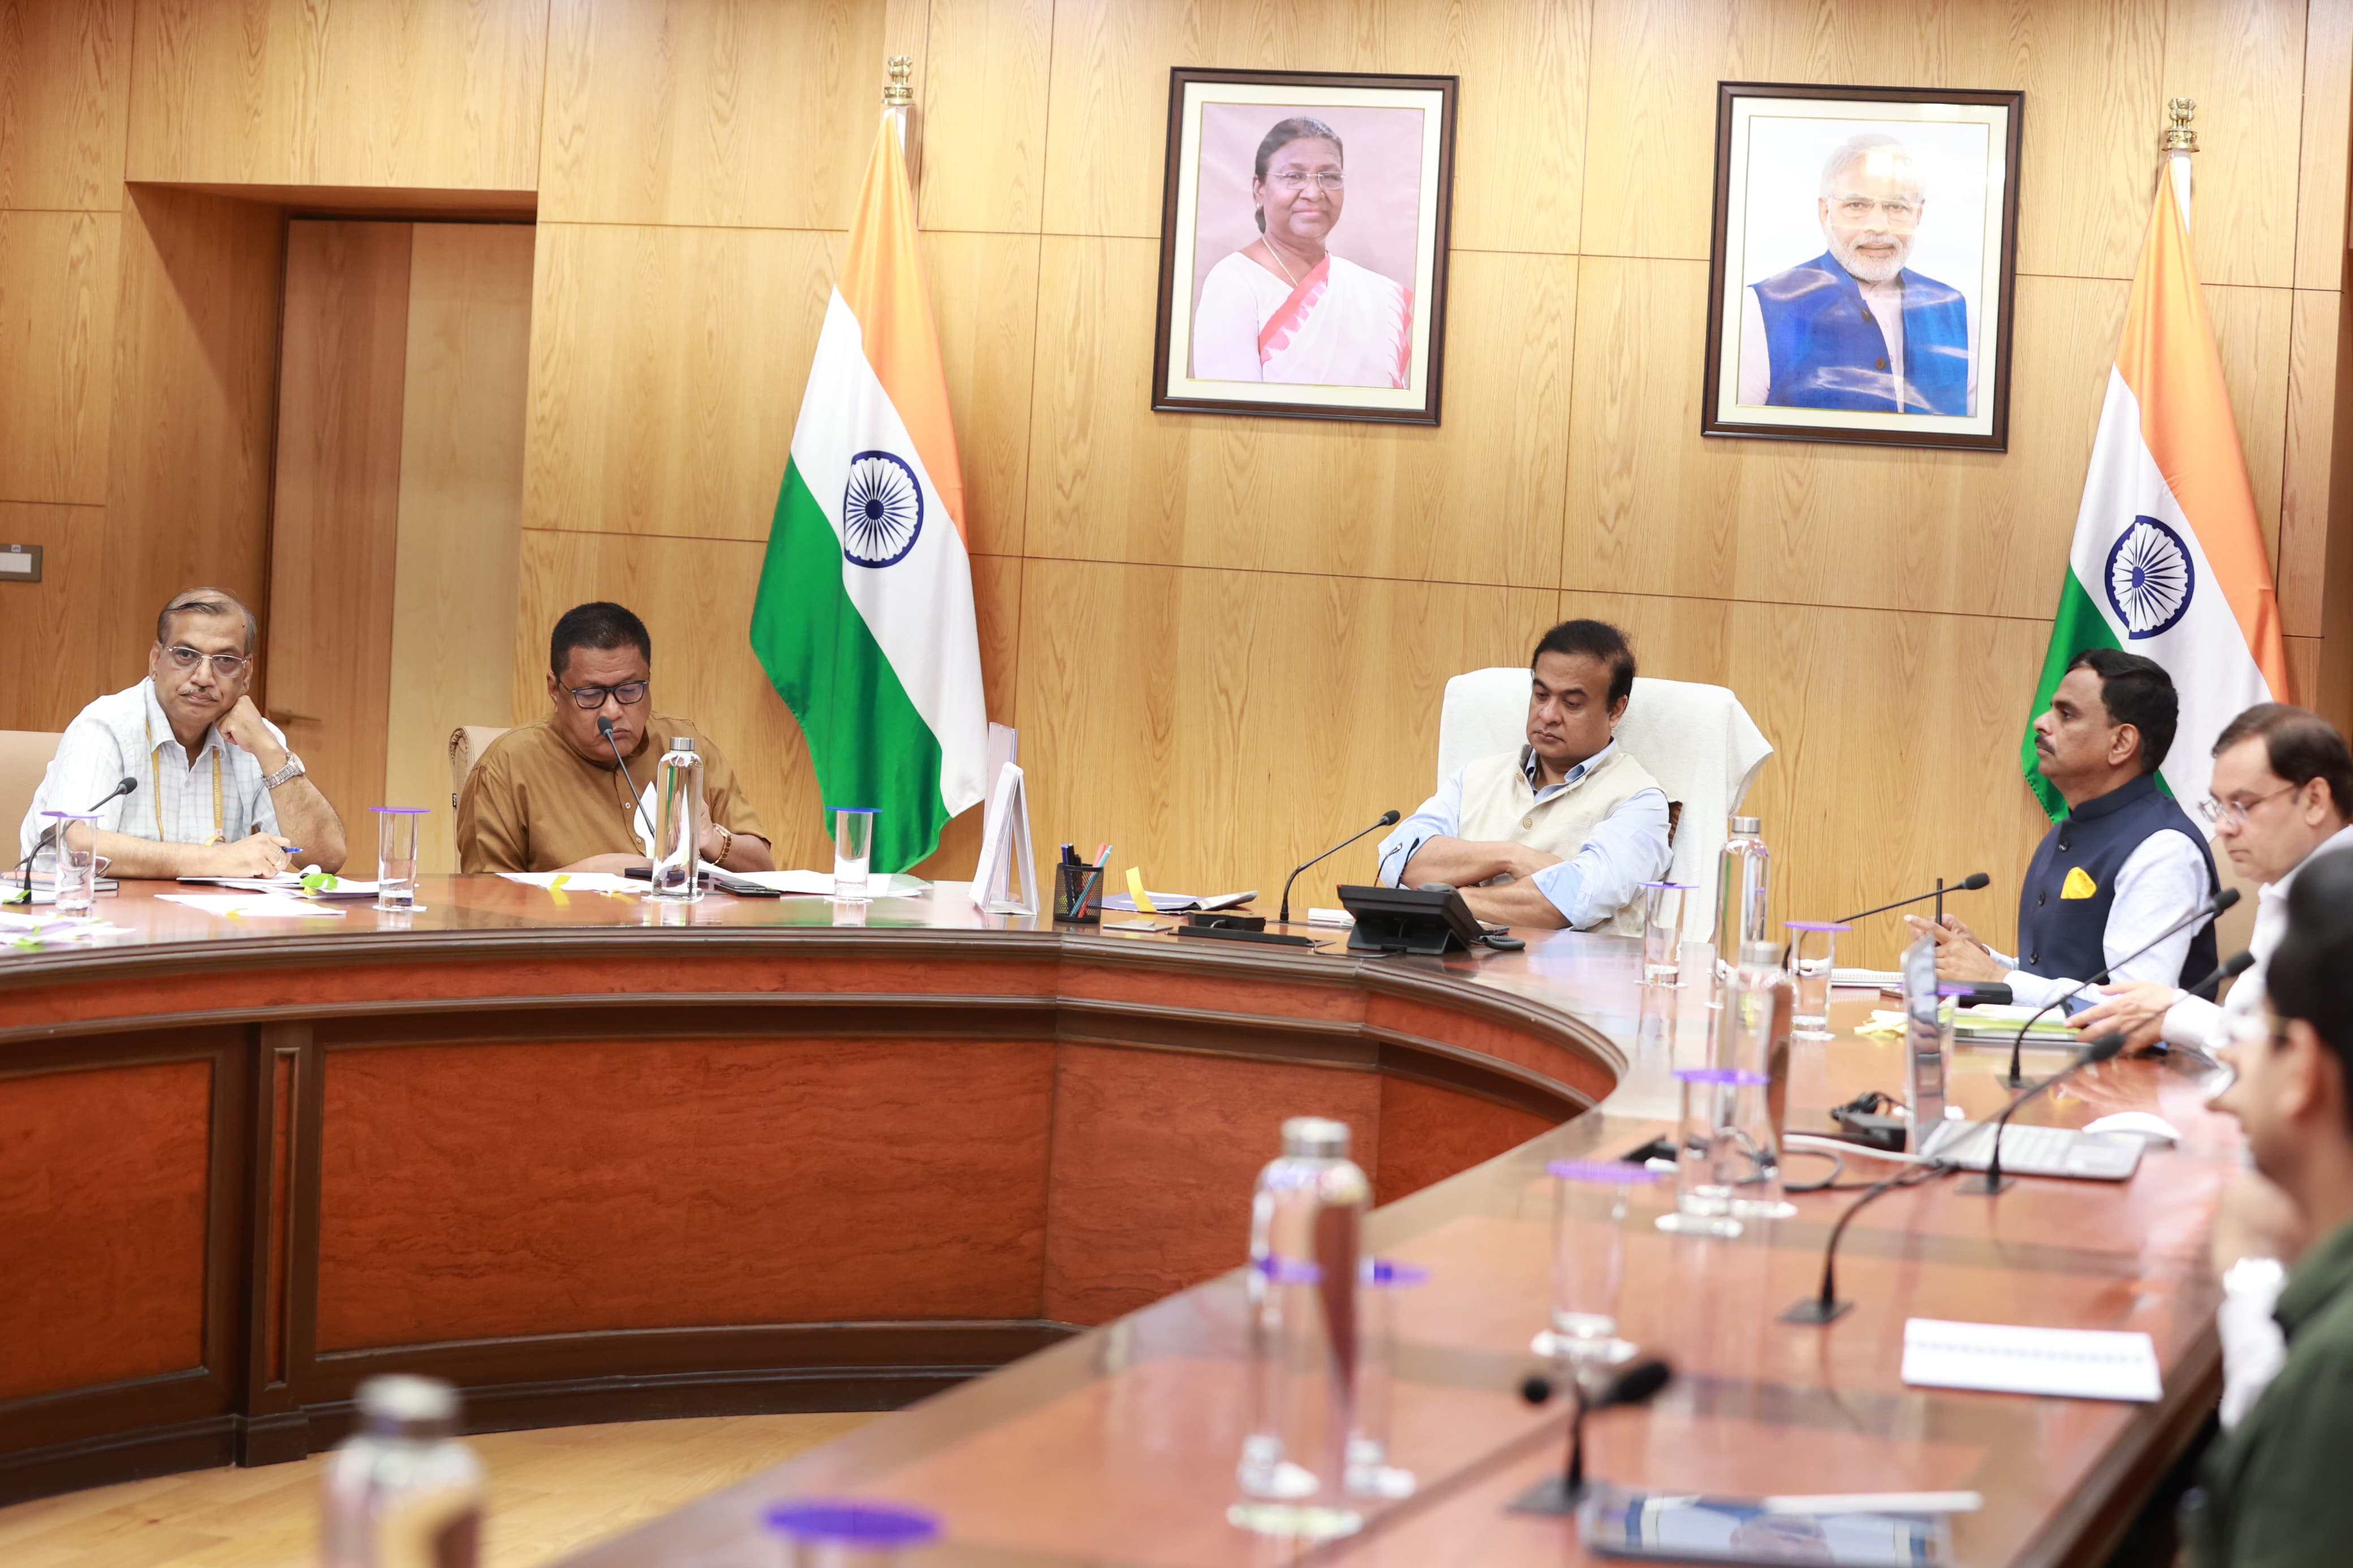 Meeting with officials of Education Dept to discuss the fee waiver scheme under Pragyan Bharti.